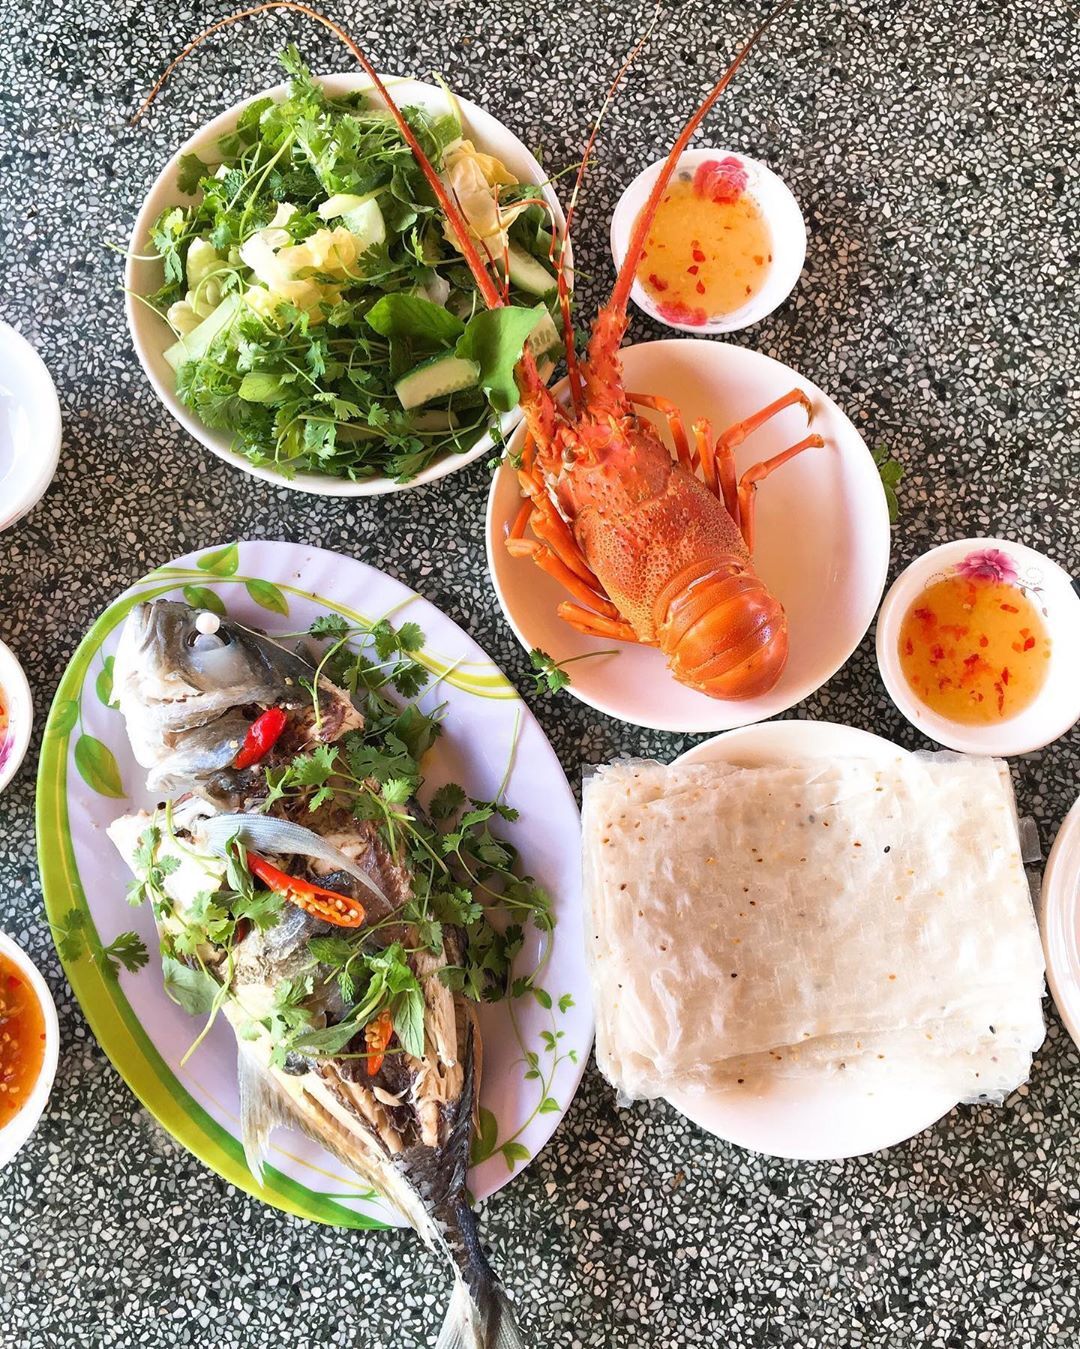 Tuck in to the freshest catch of the day at Vinh Hy Bay.